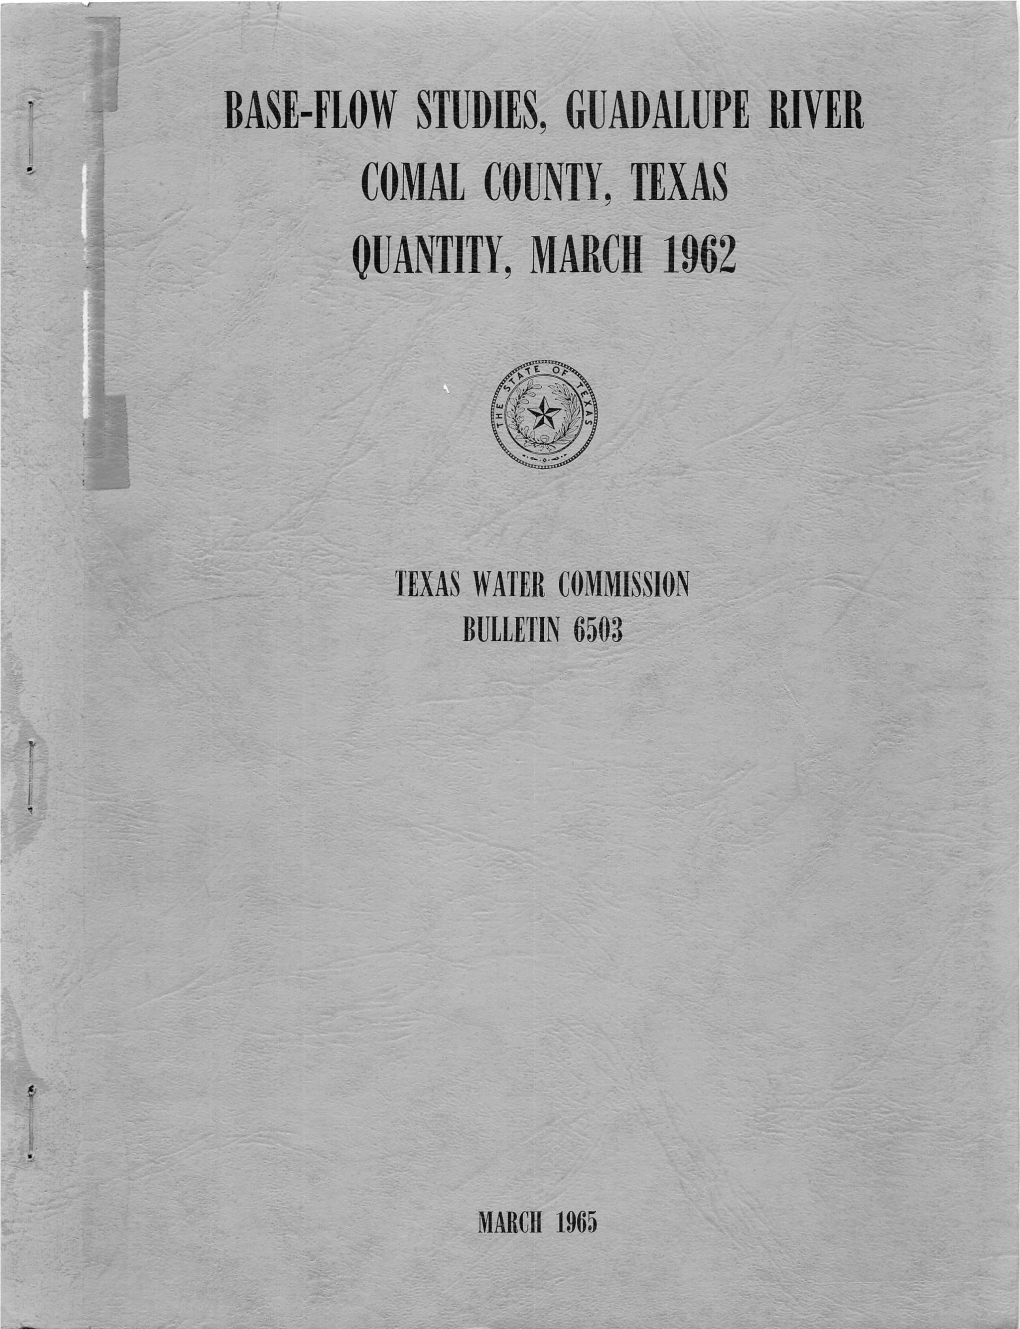 Base-Flow Studies, Guadalupe River Comal County, Texas Quantity, March 1962